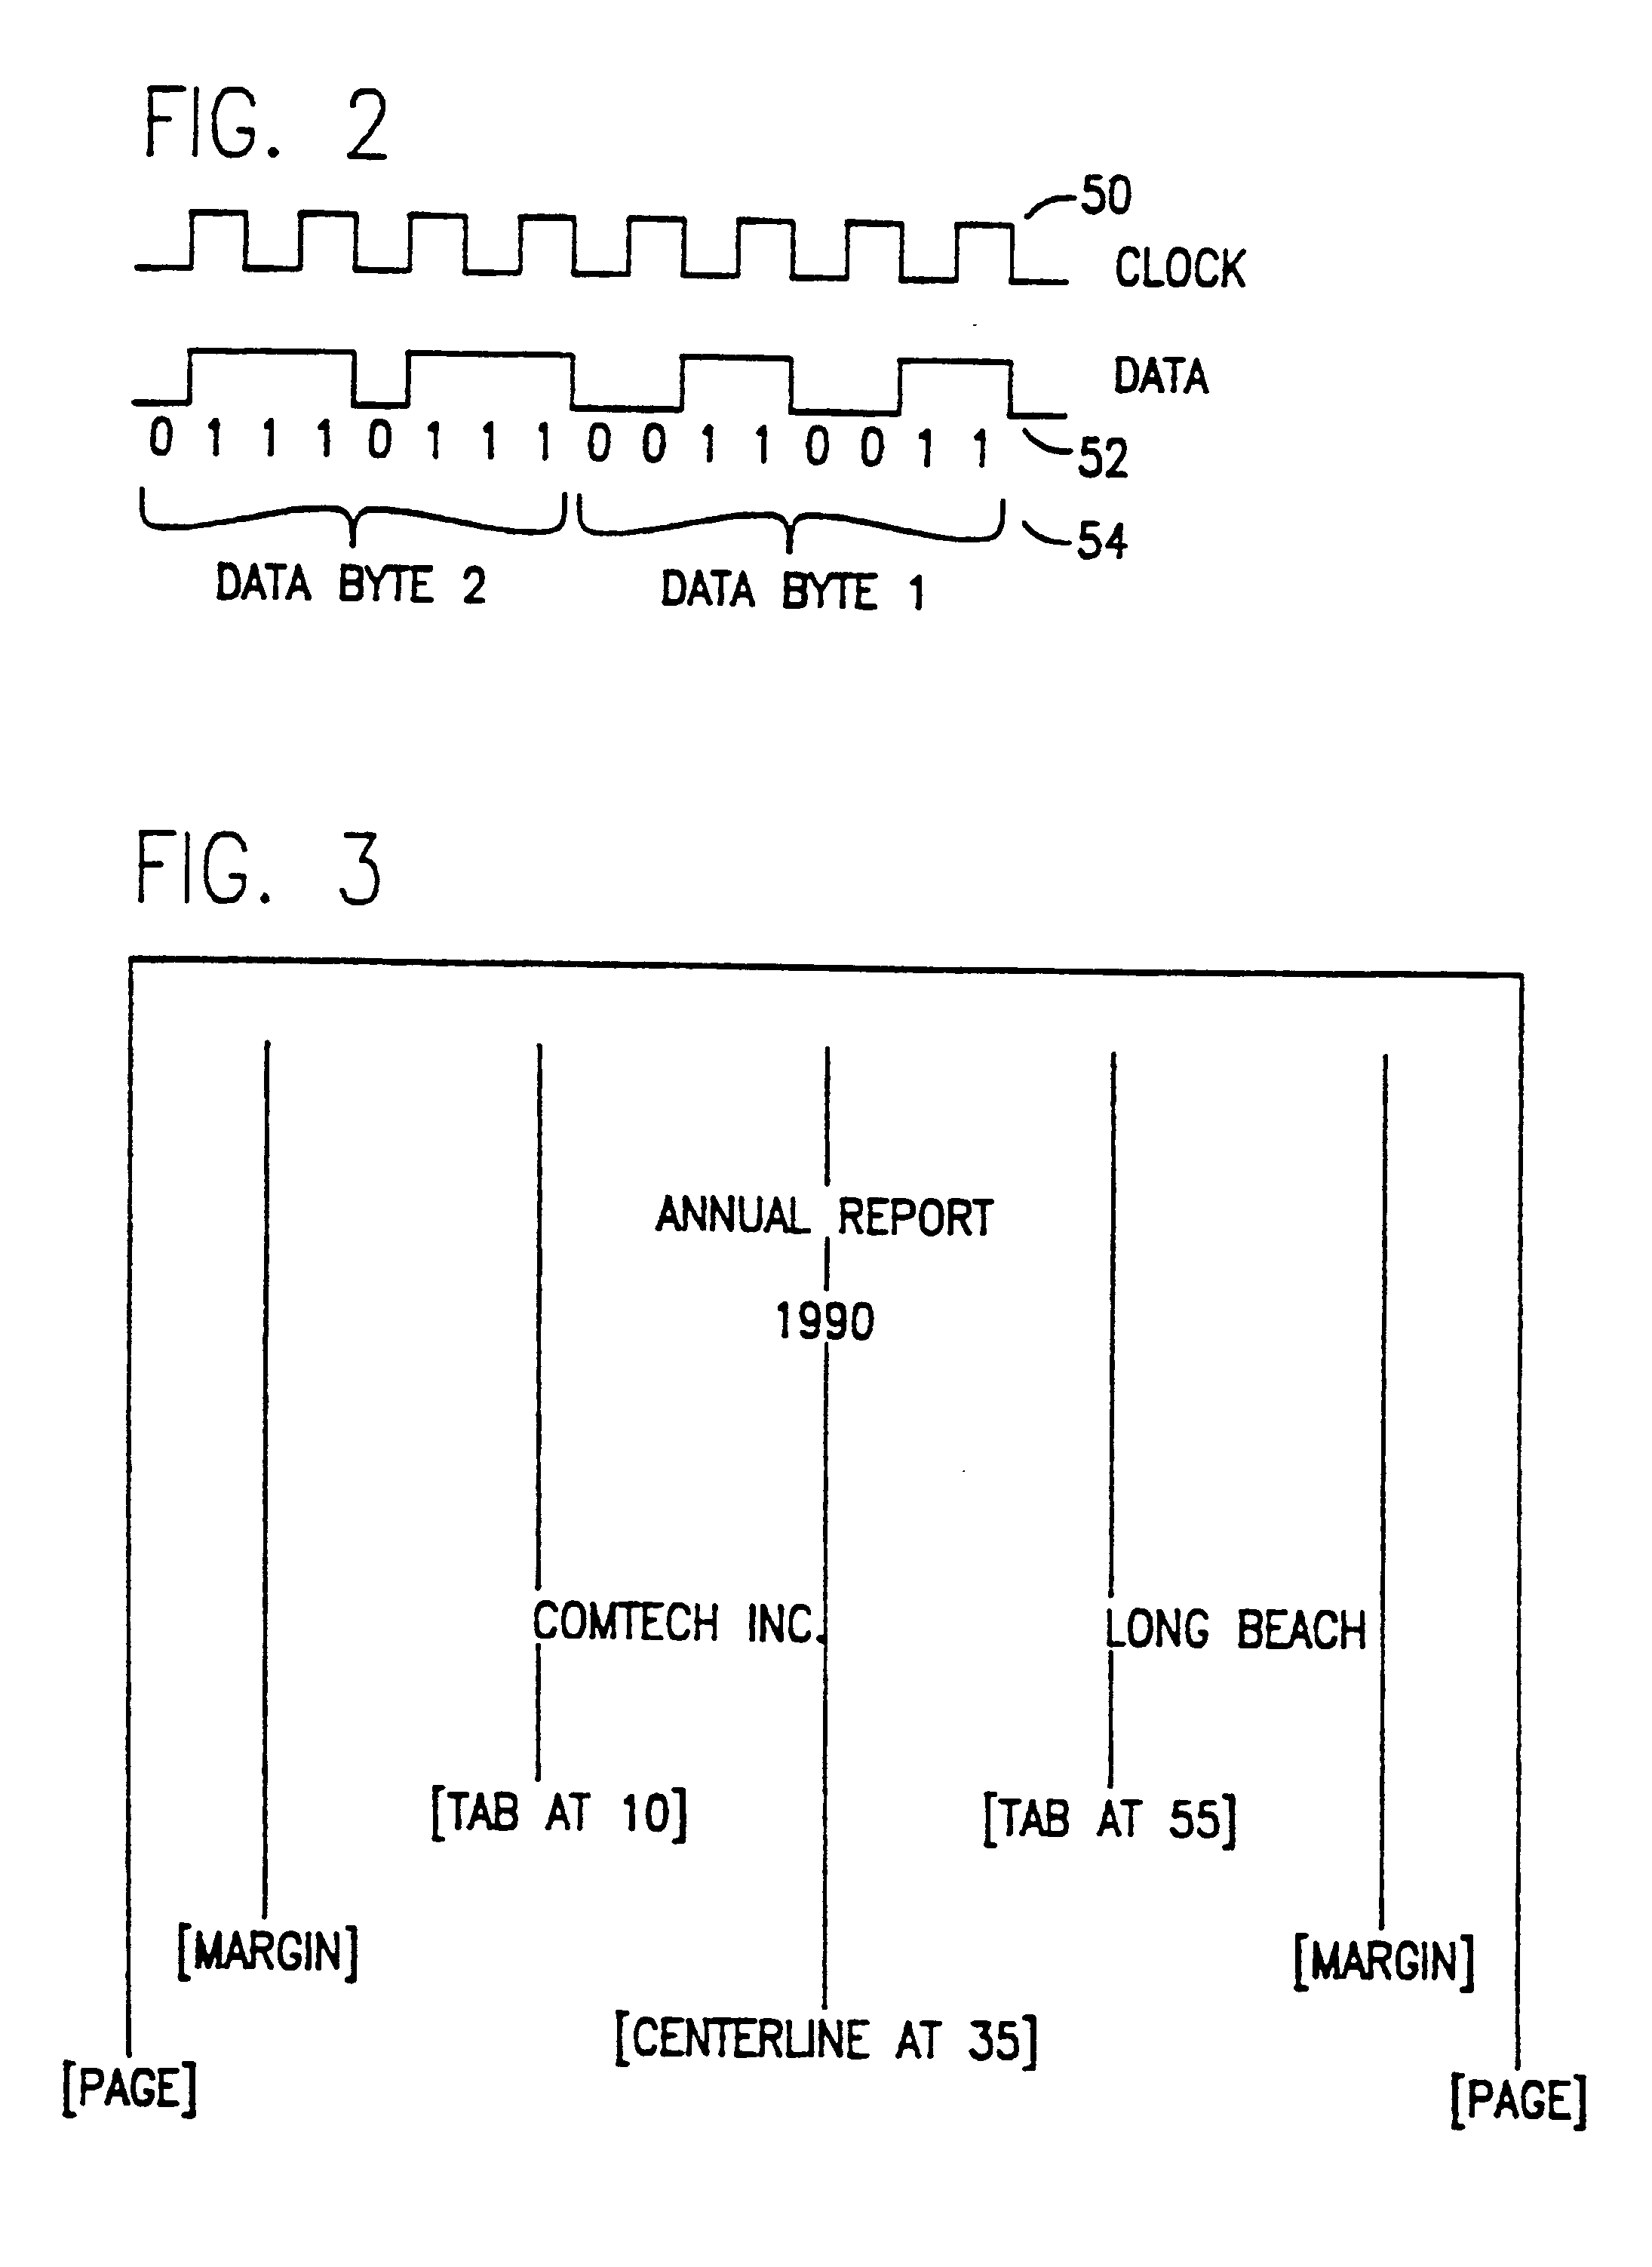 Portable data storage and editing device